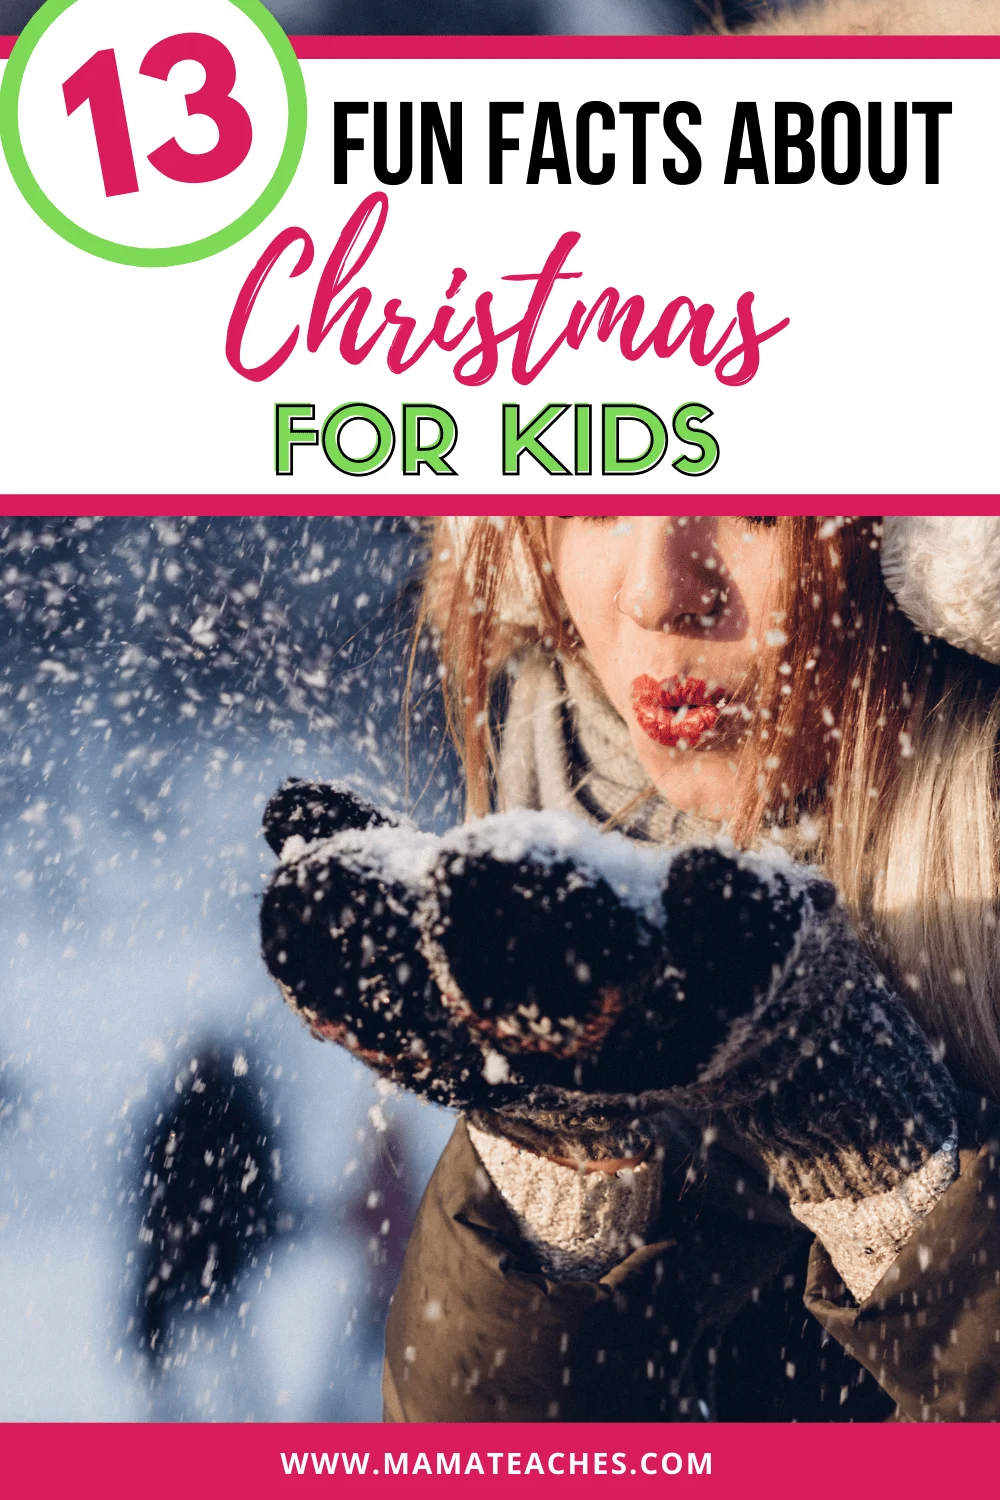 13 Fun Facts About Christmas for Kids